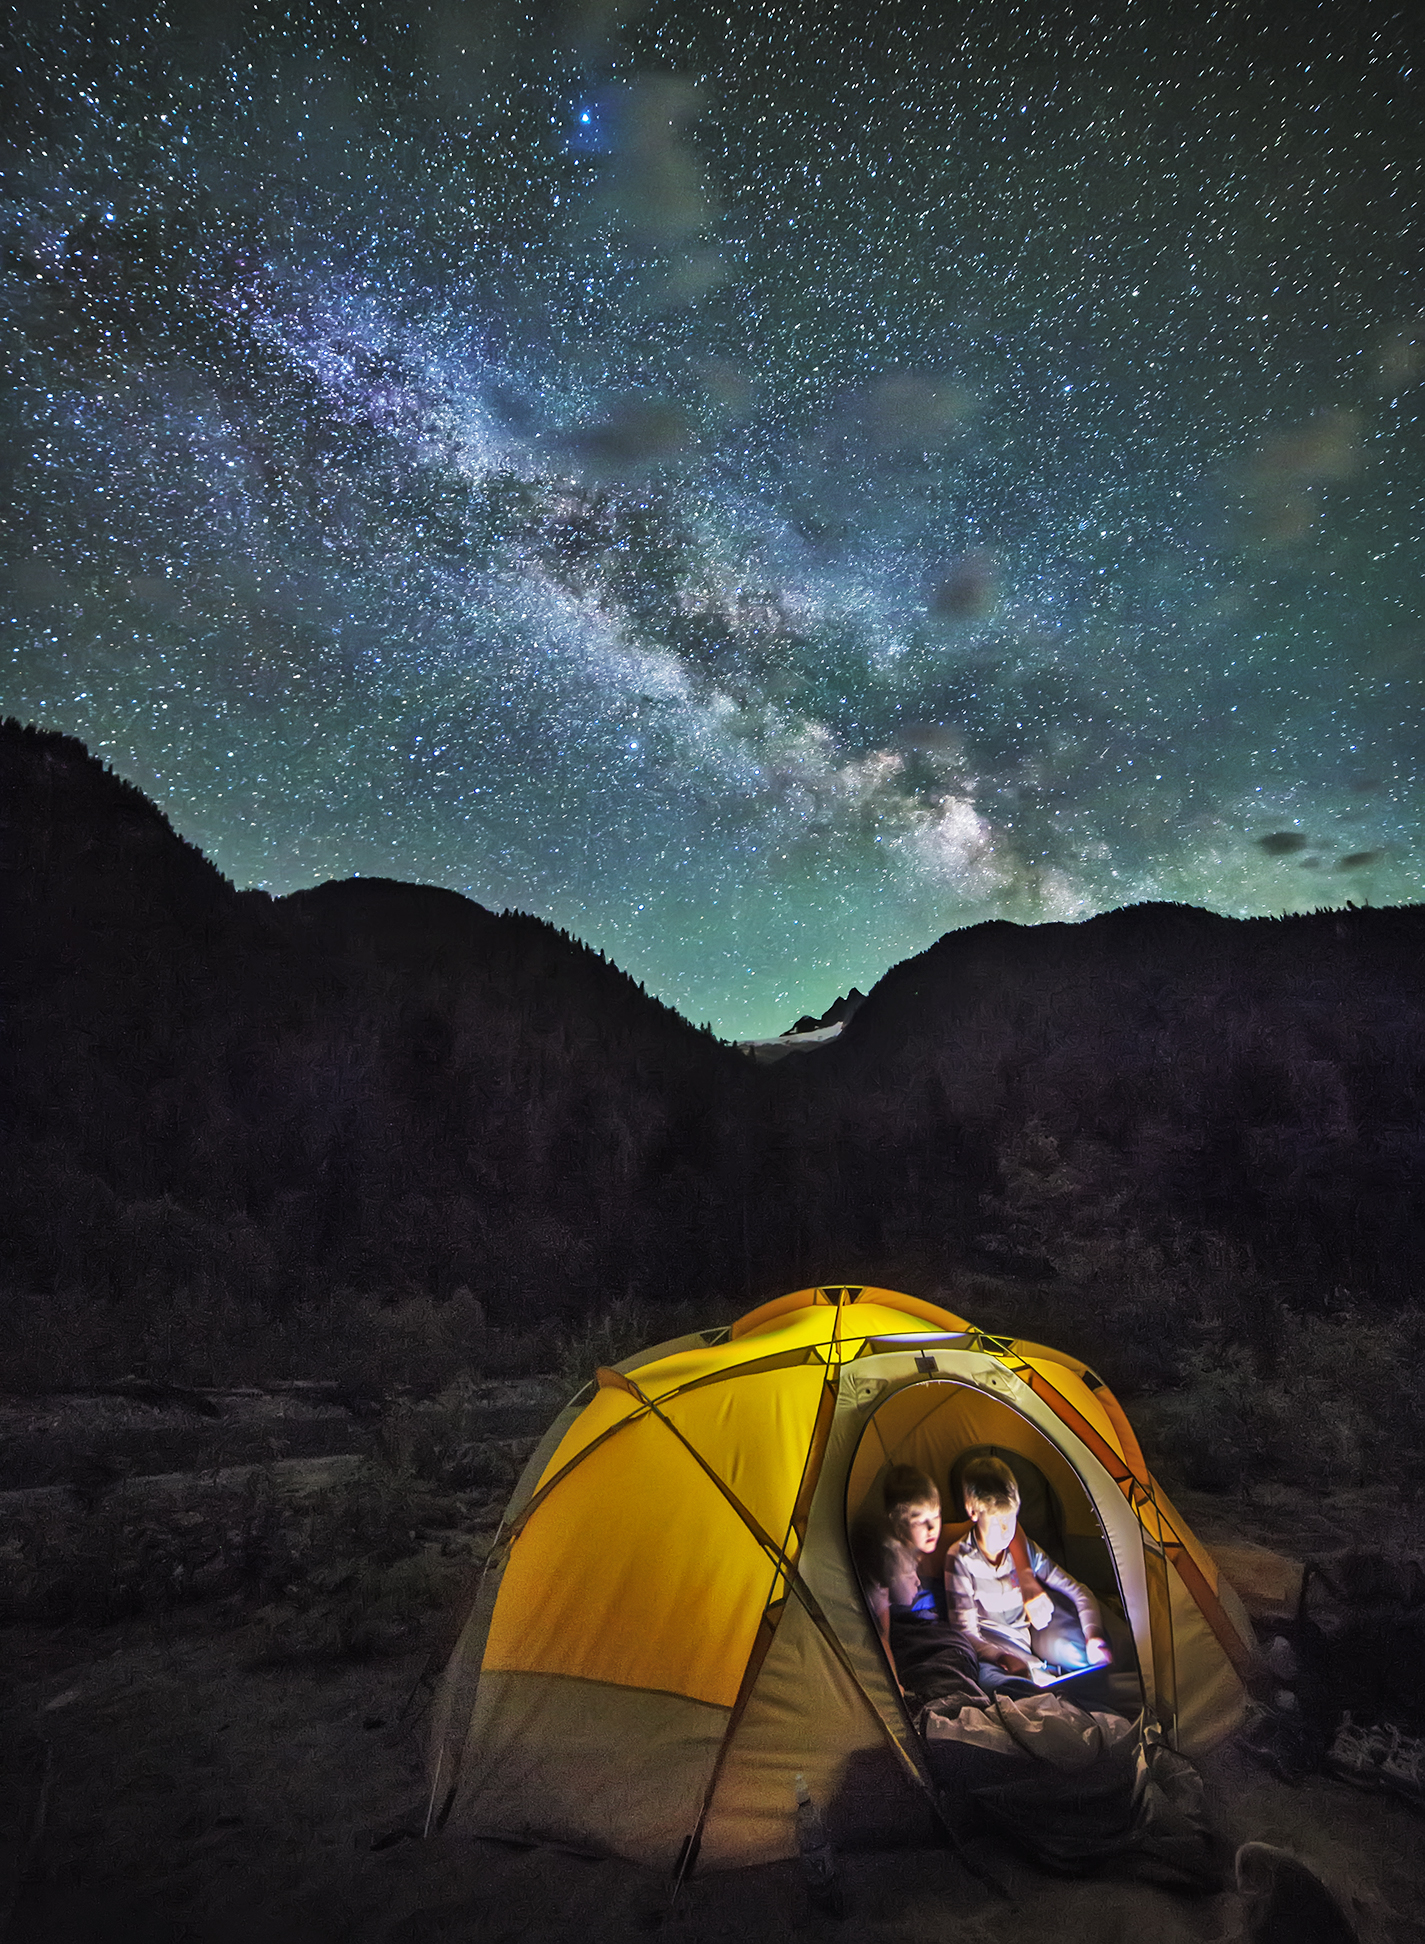 Camped under the Milky Way 3 card 2016 a.